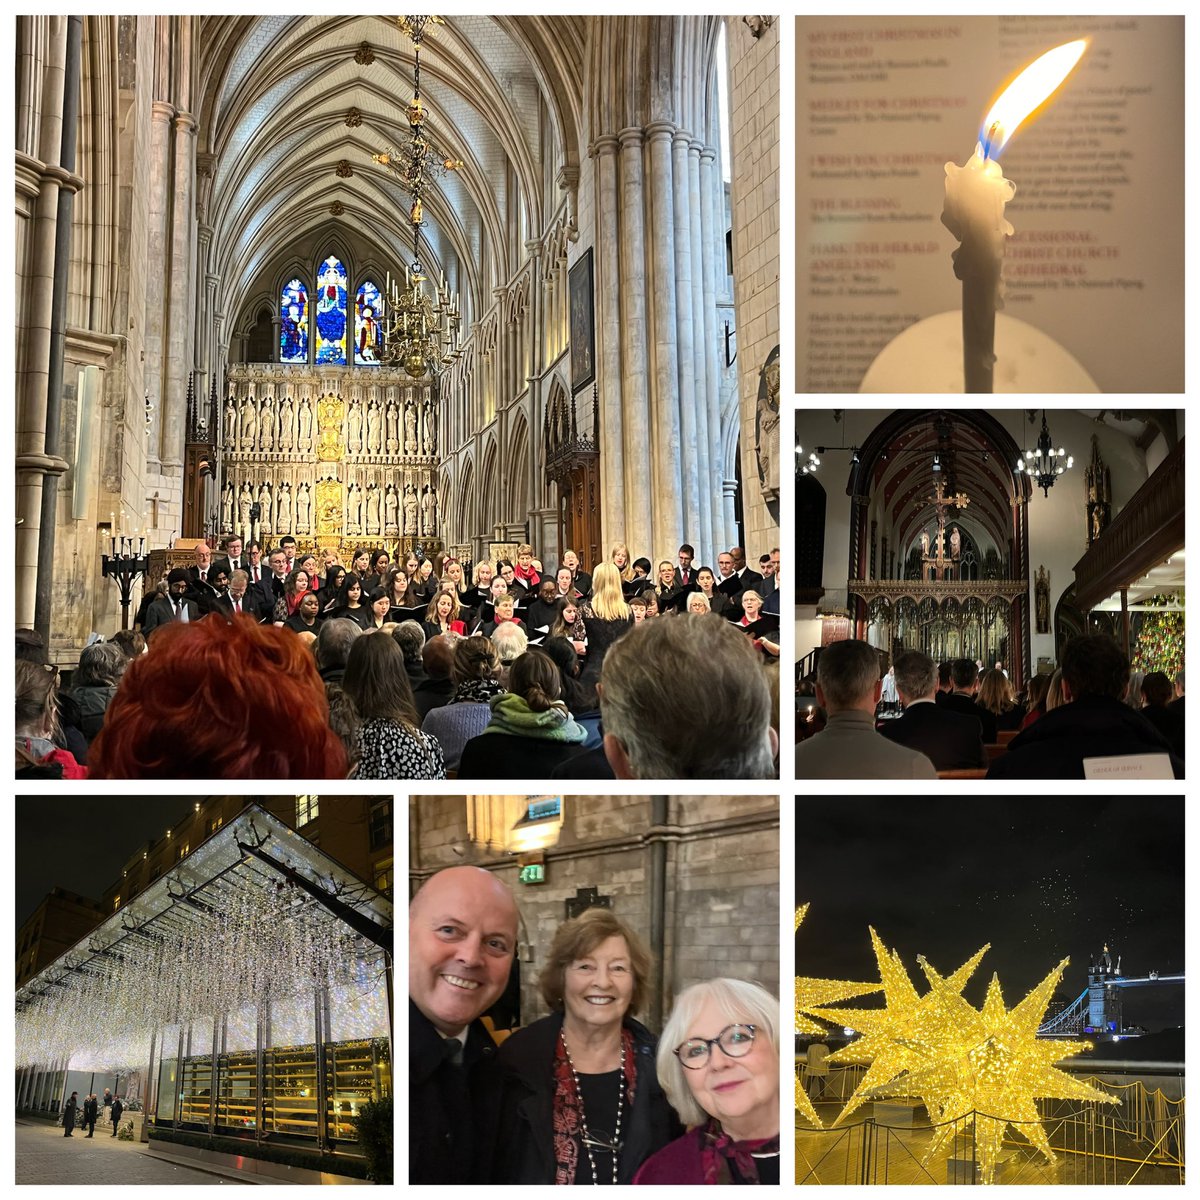 Not one but two charity carol services yesterday proud of everyone involved in our @PwC_UK service @Southwarkcathed raising funds for @crisis_uk @hospiceuk @WellbeingofWmen @beyondfooduk and all @TheKingsFound 🎄